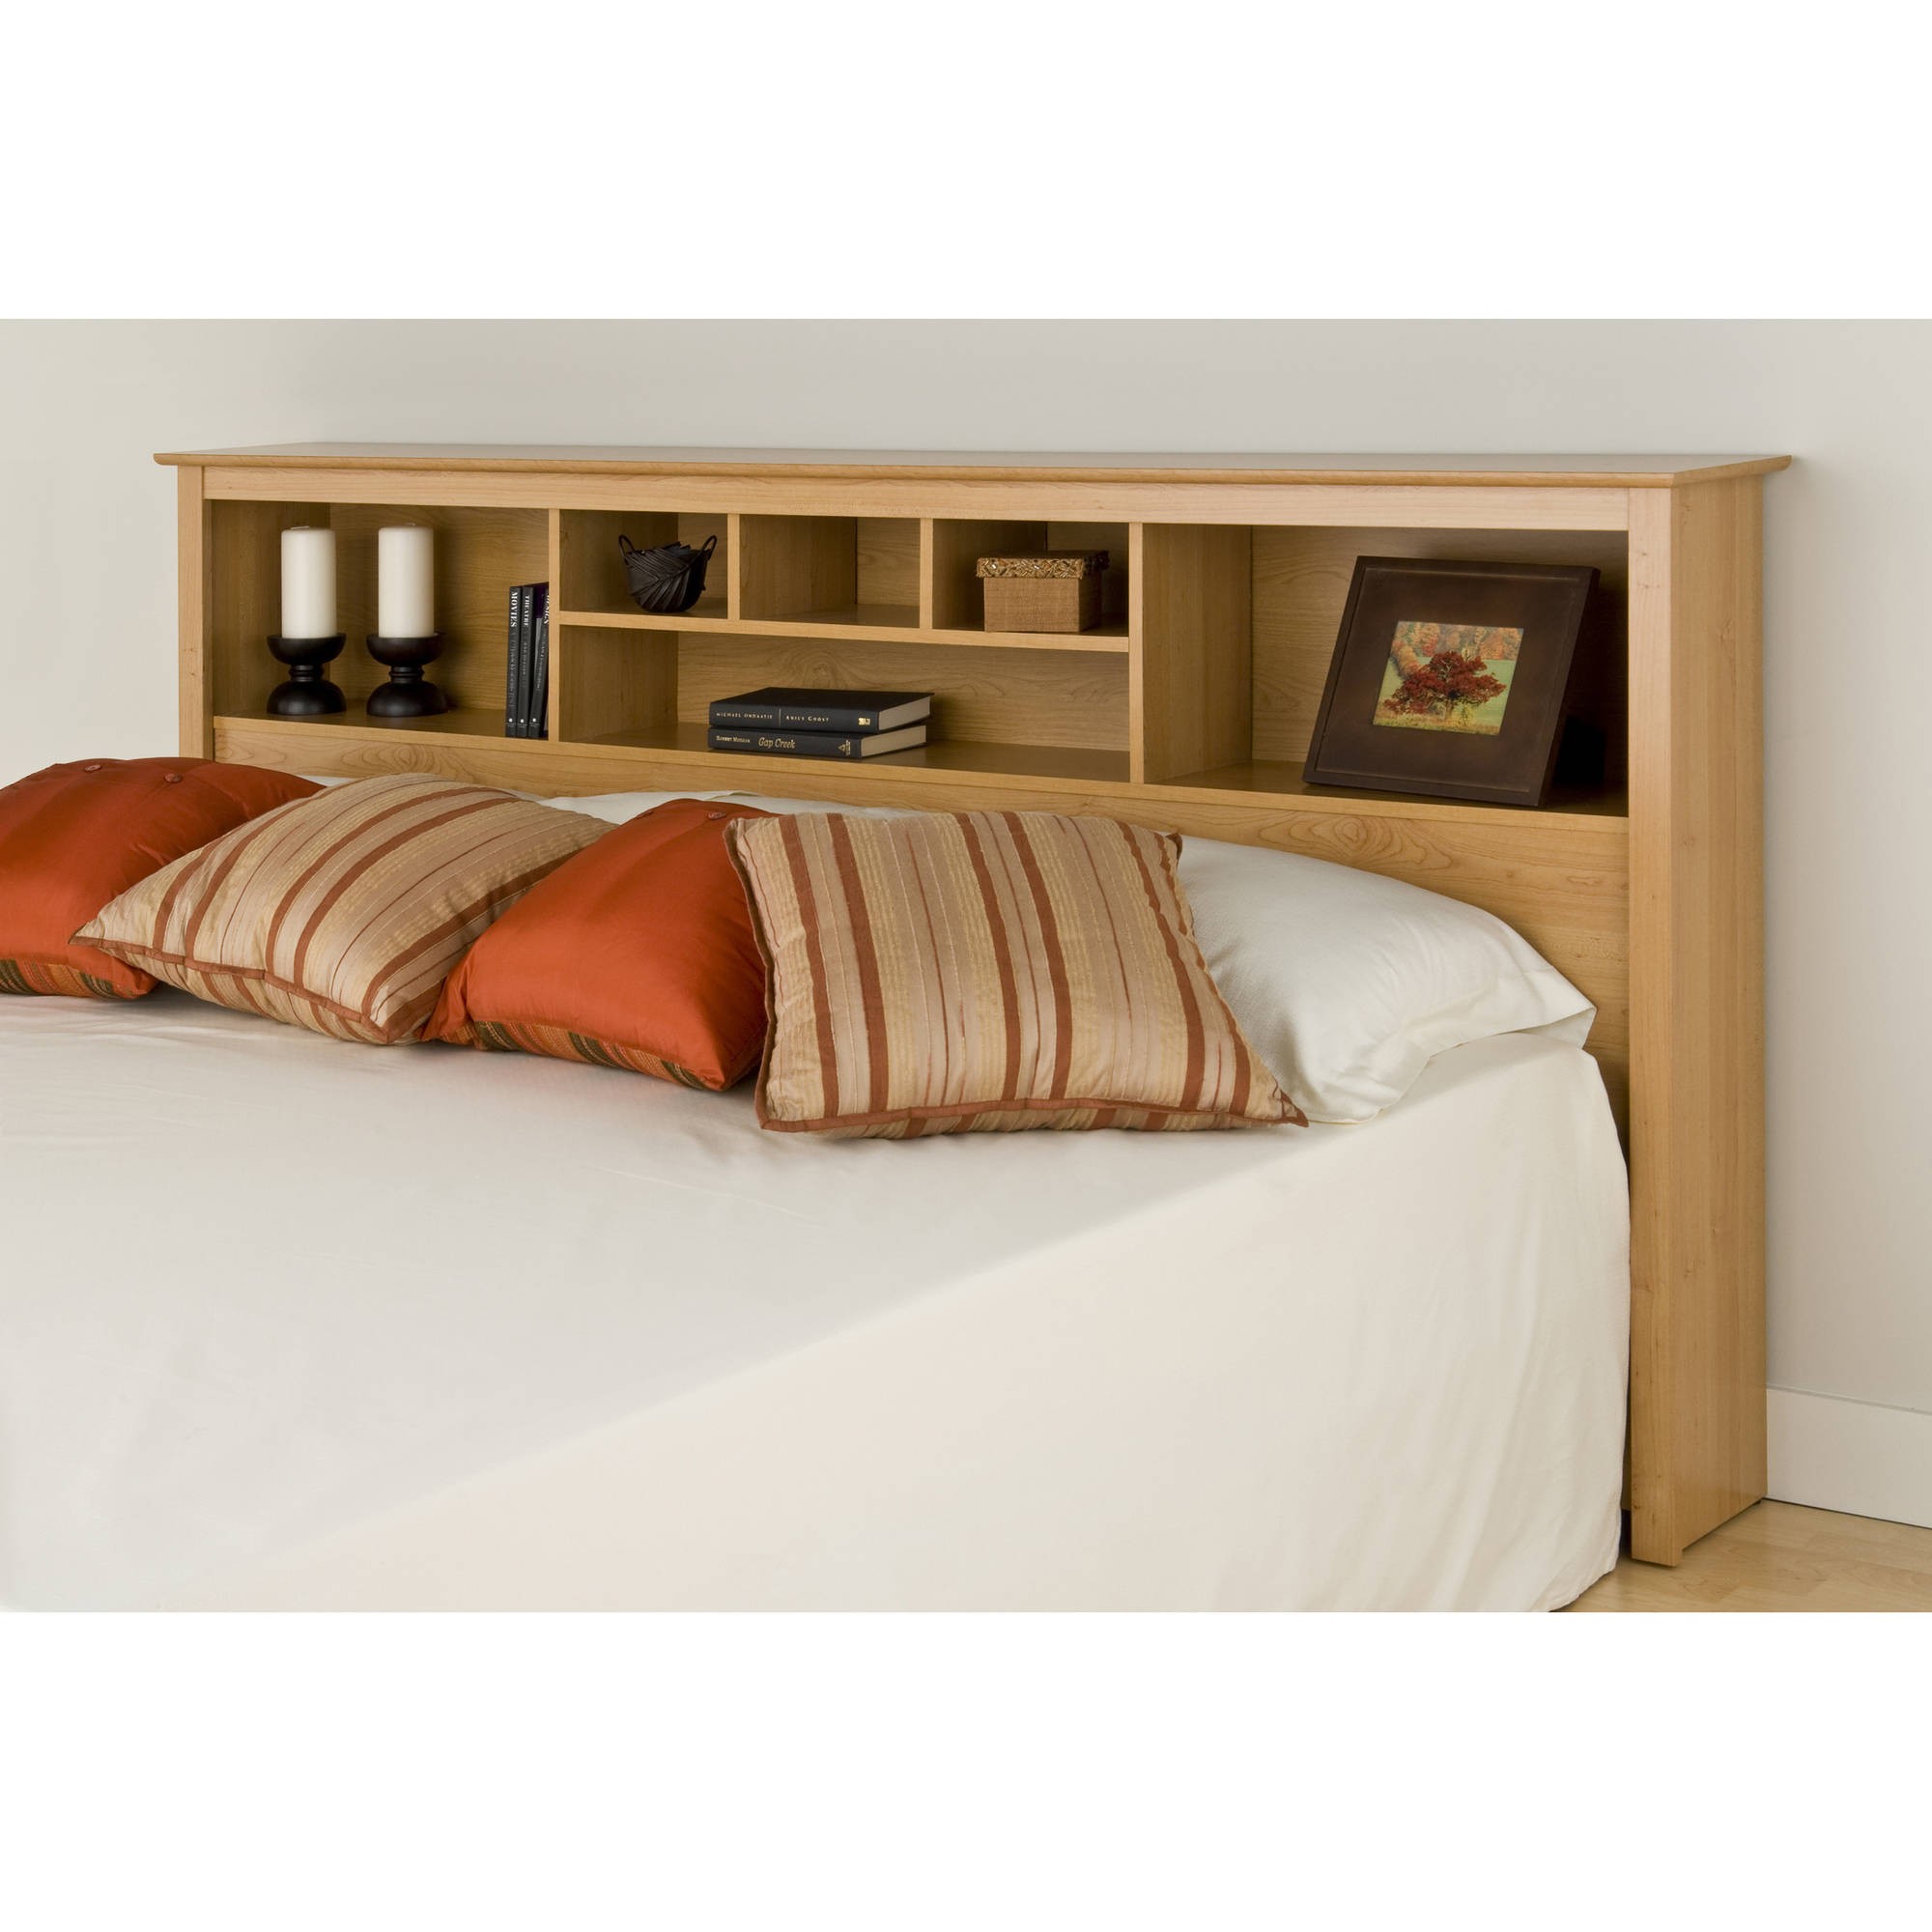 King size headboard with shelves